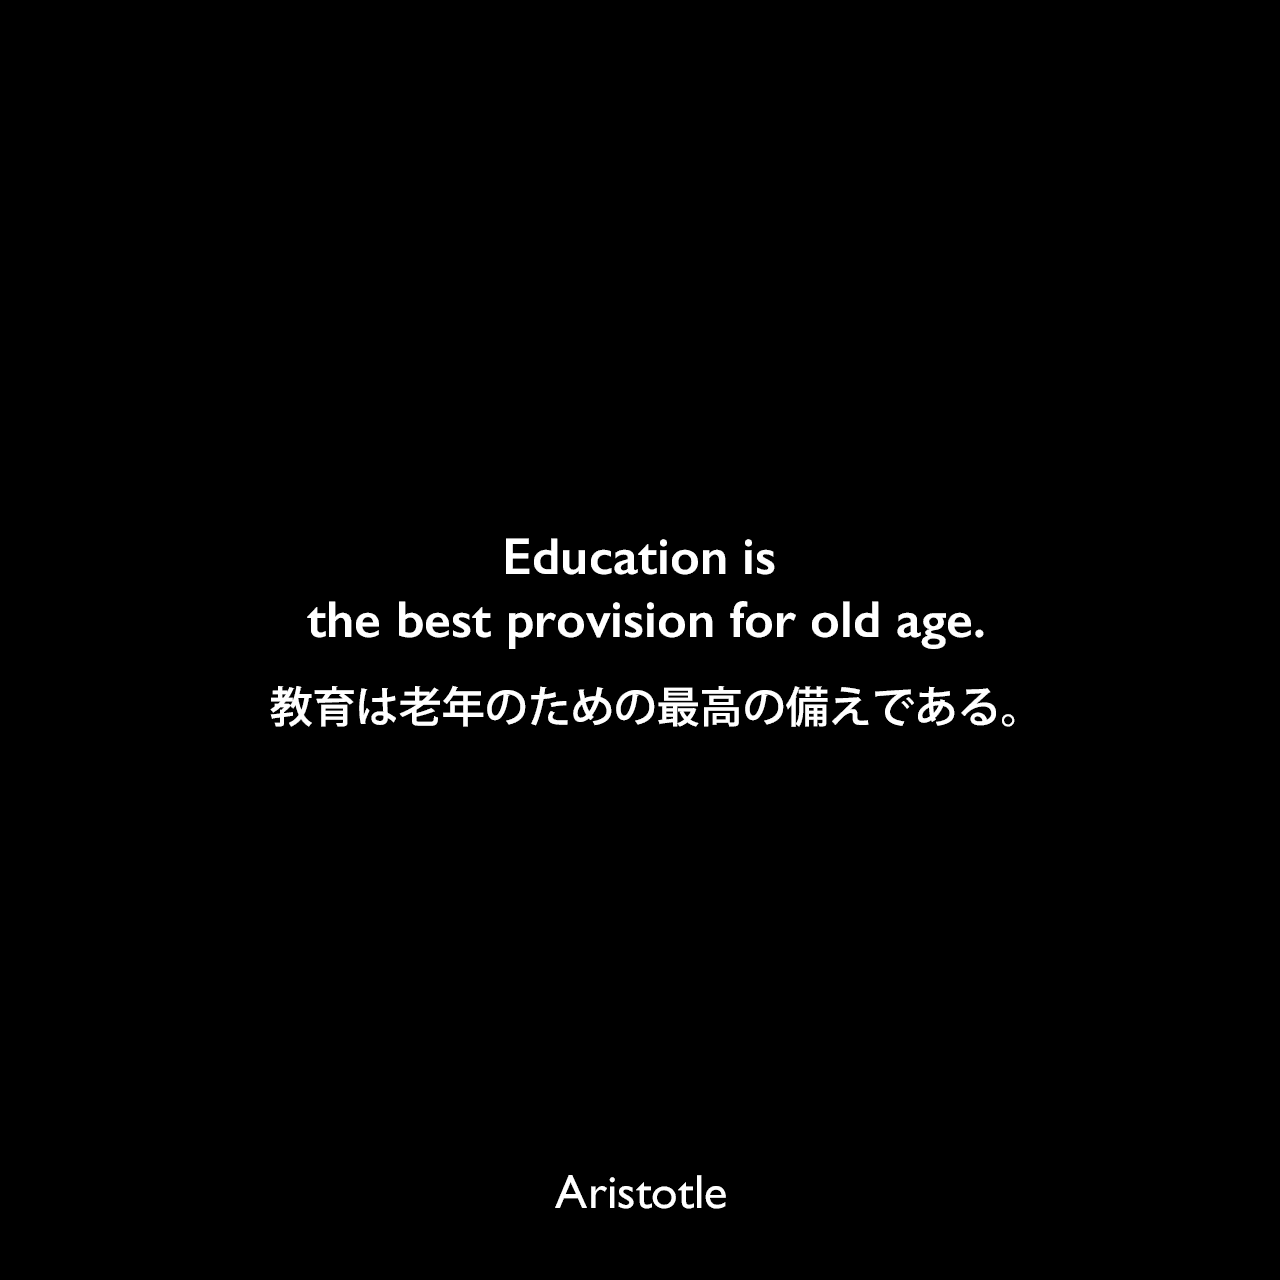 Education is the best provision for old age.教育は老年のための最高の備えである。Aristotle